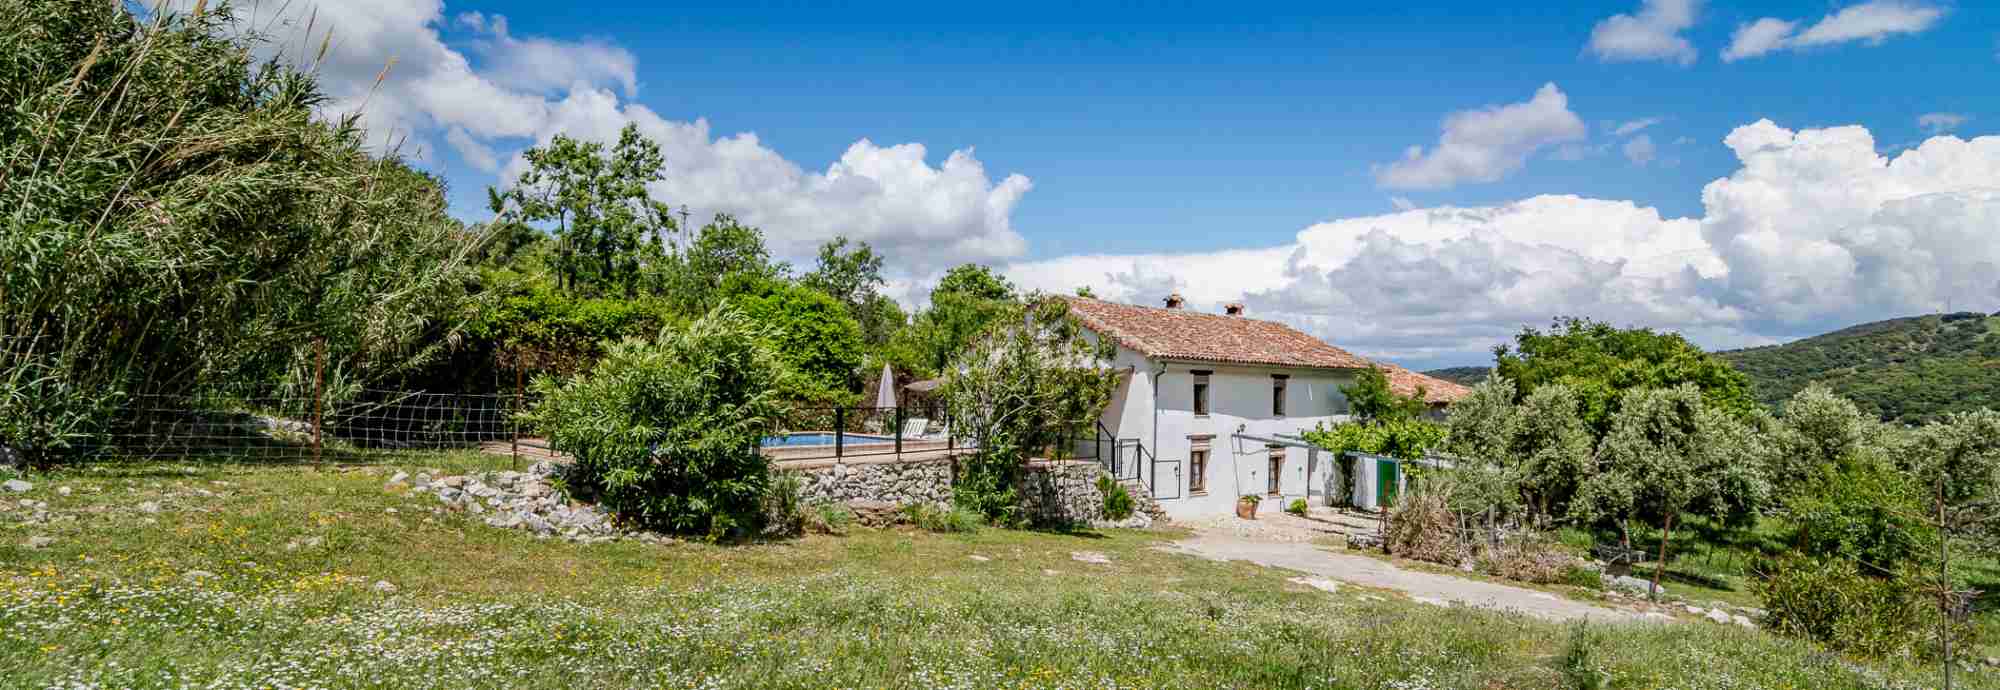 Rustic private villa with pool in Grazalema Natural Park, Andalucia